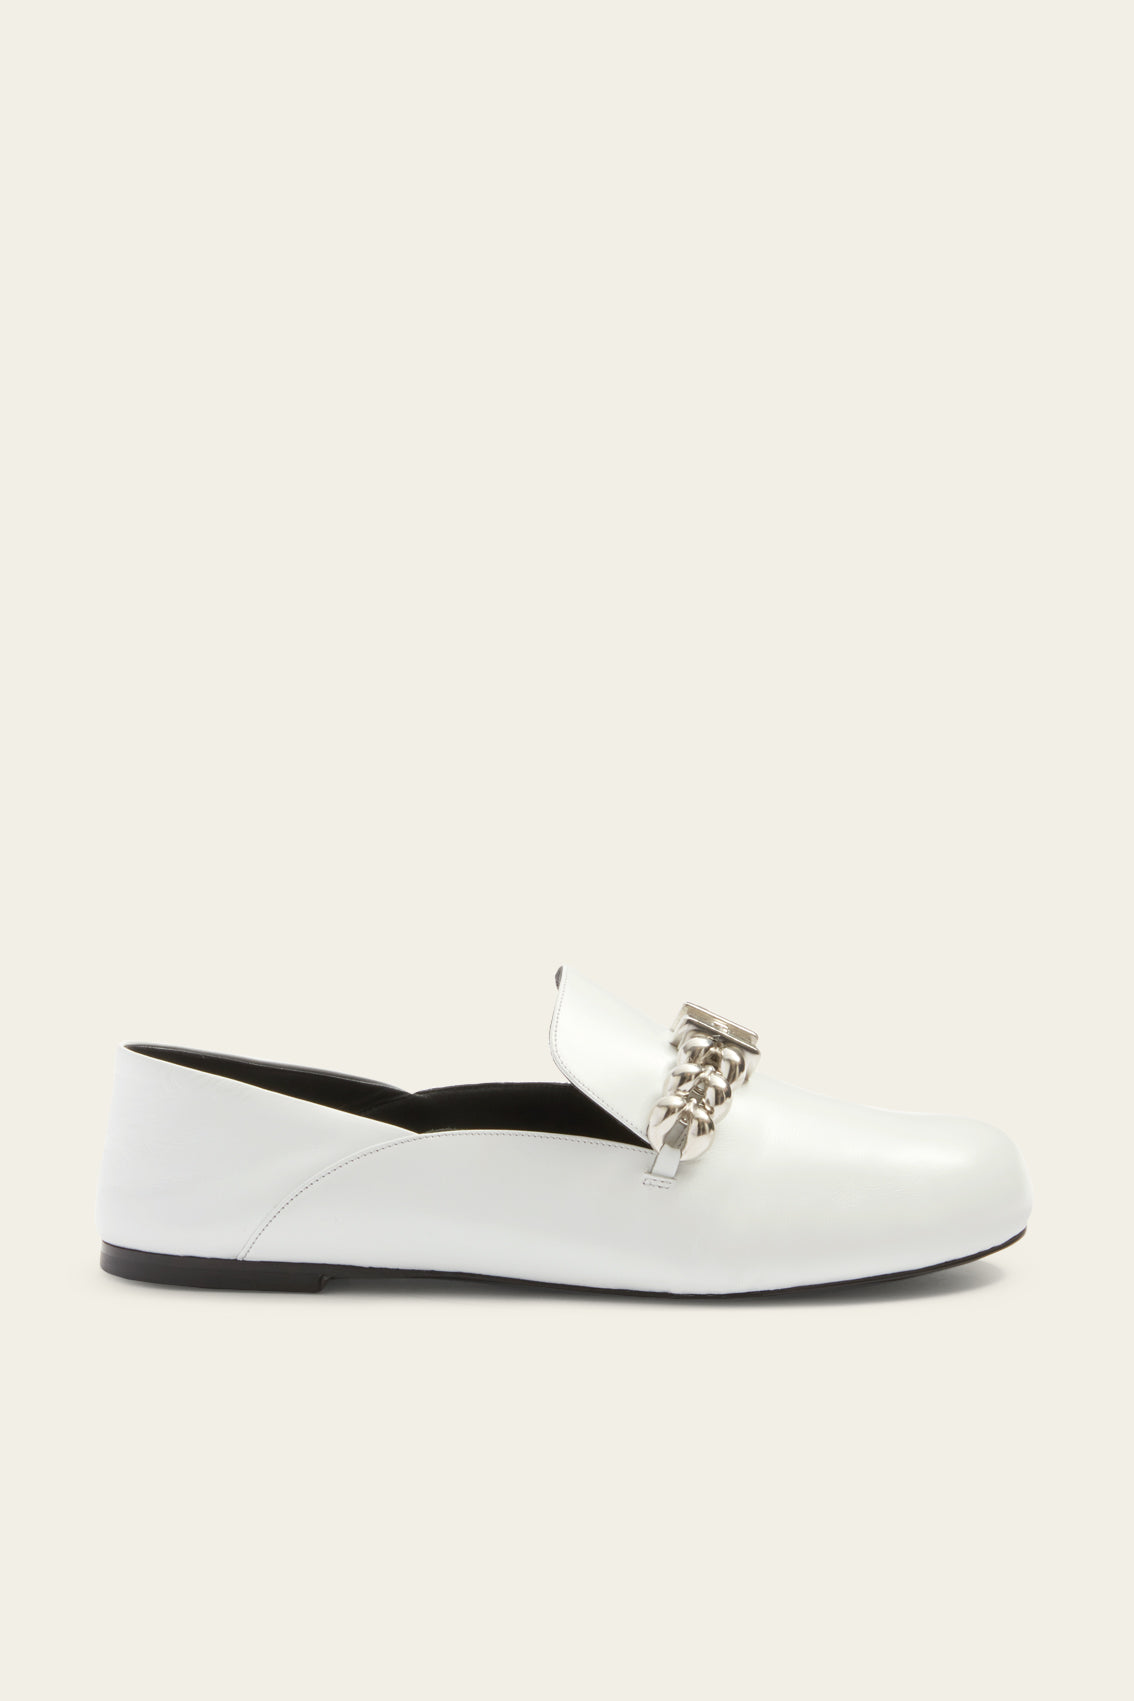 Chain Detail Loafer in White